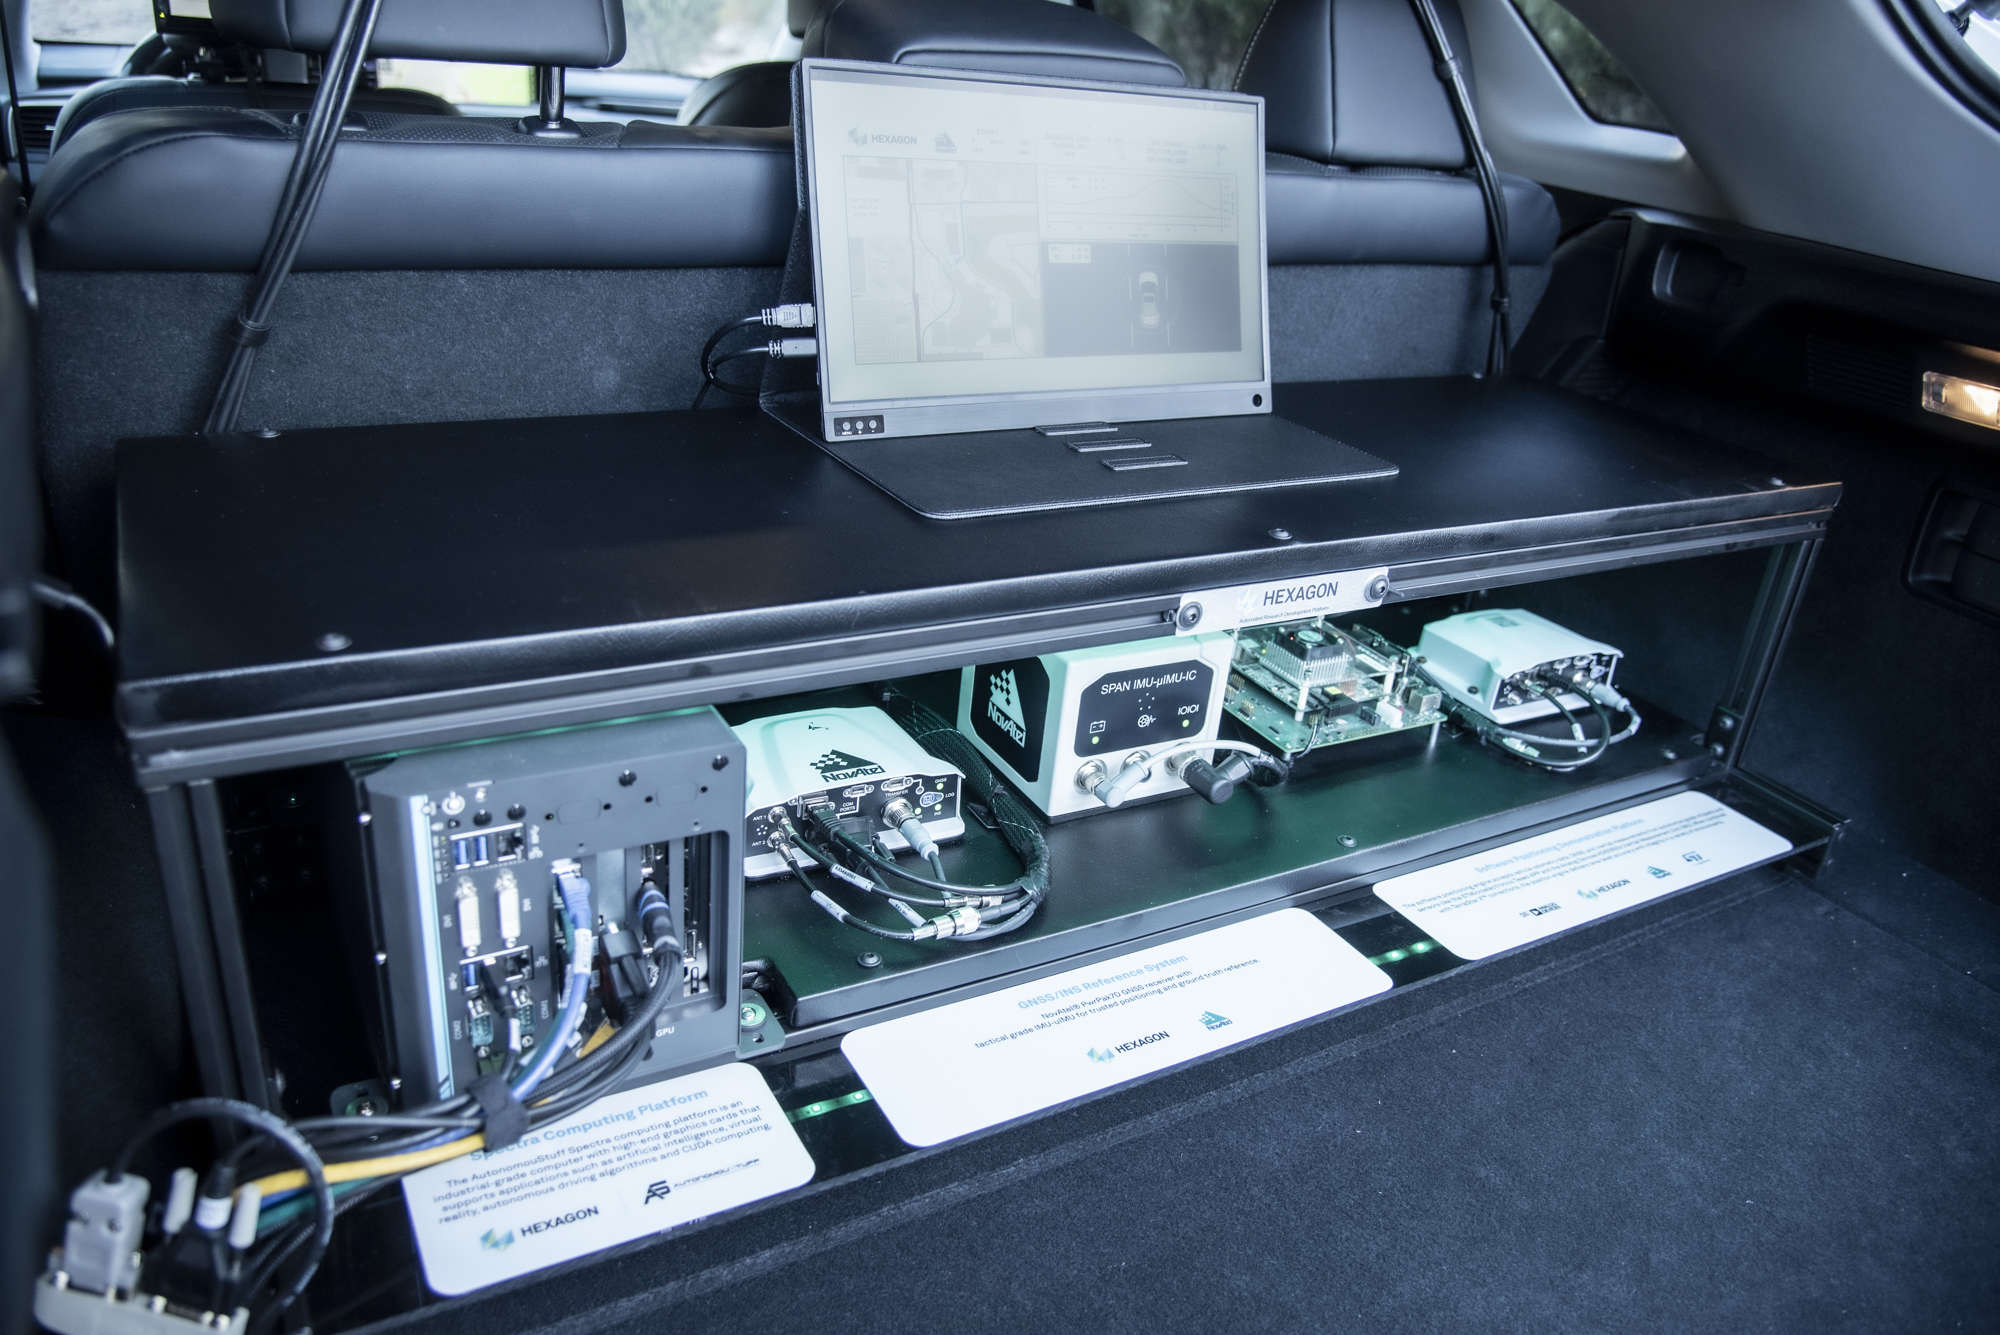 Photograph of GNSS antennas, receivers, and inertial measurement units inside the trunk of a vehicle